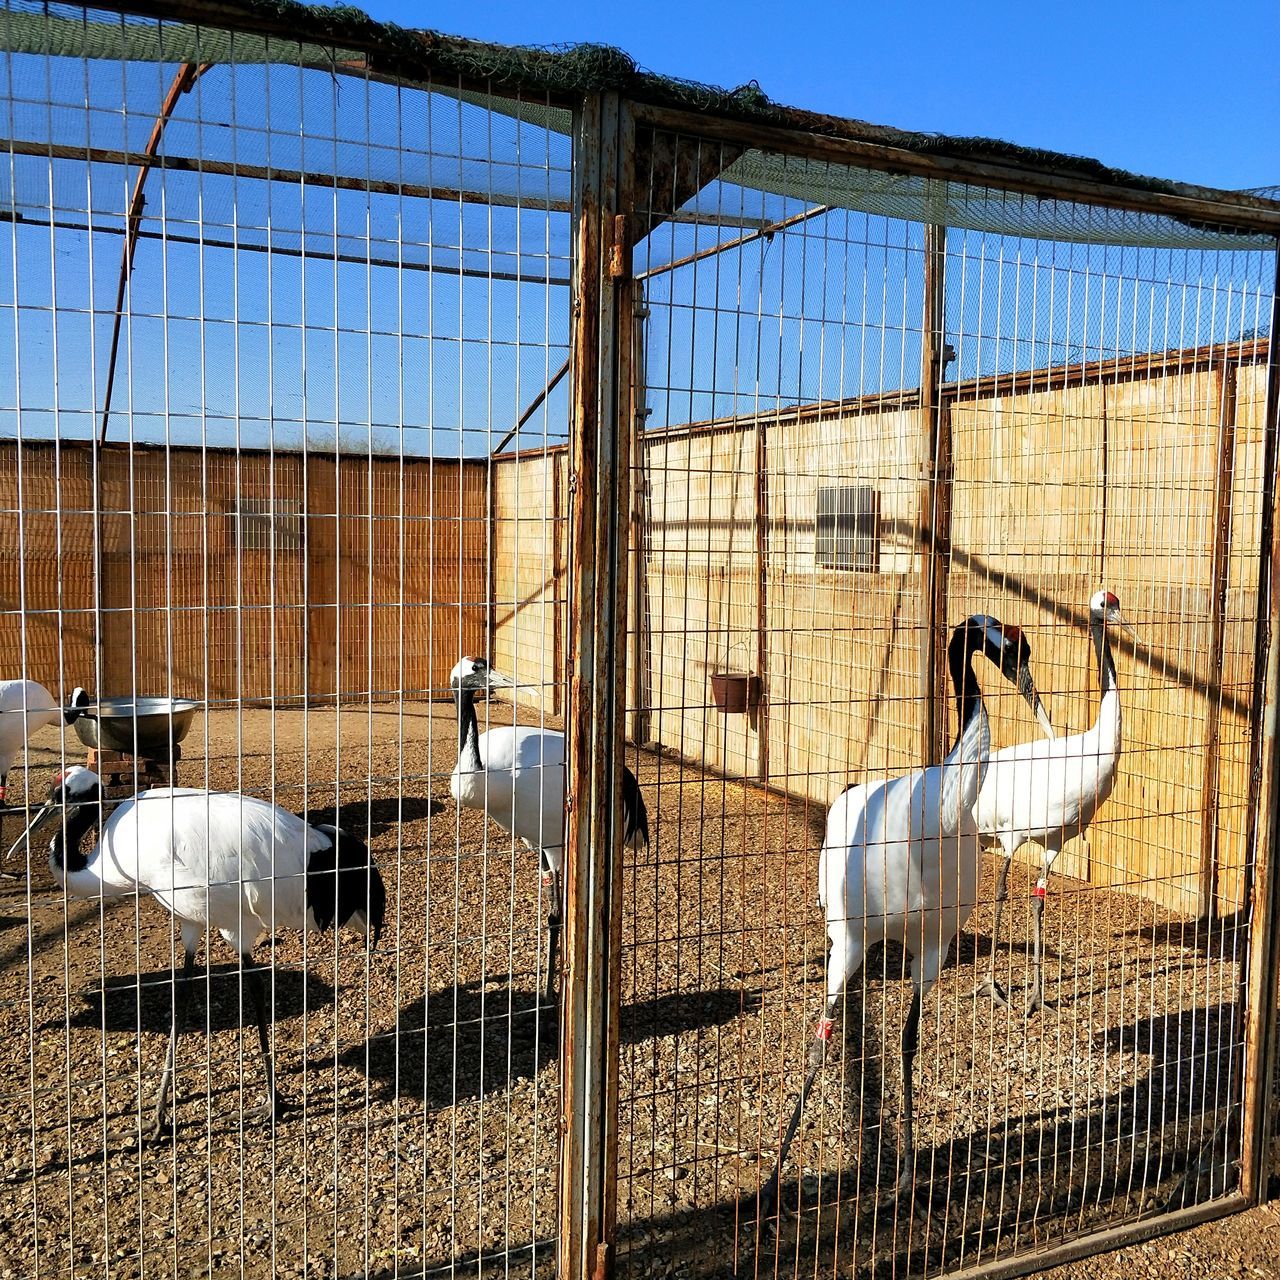 animal themes, livestock, domestic animals, bird, large group of animals, metal, cage, day, mammal, outdoors, no people, nature, sky